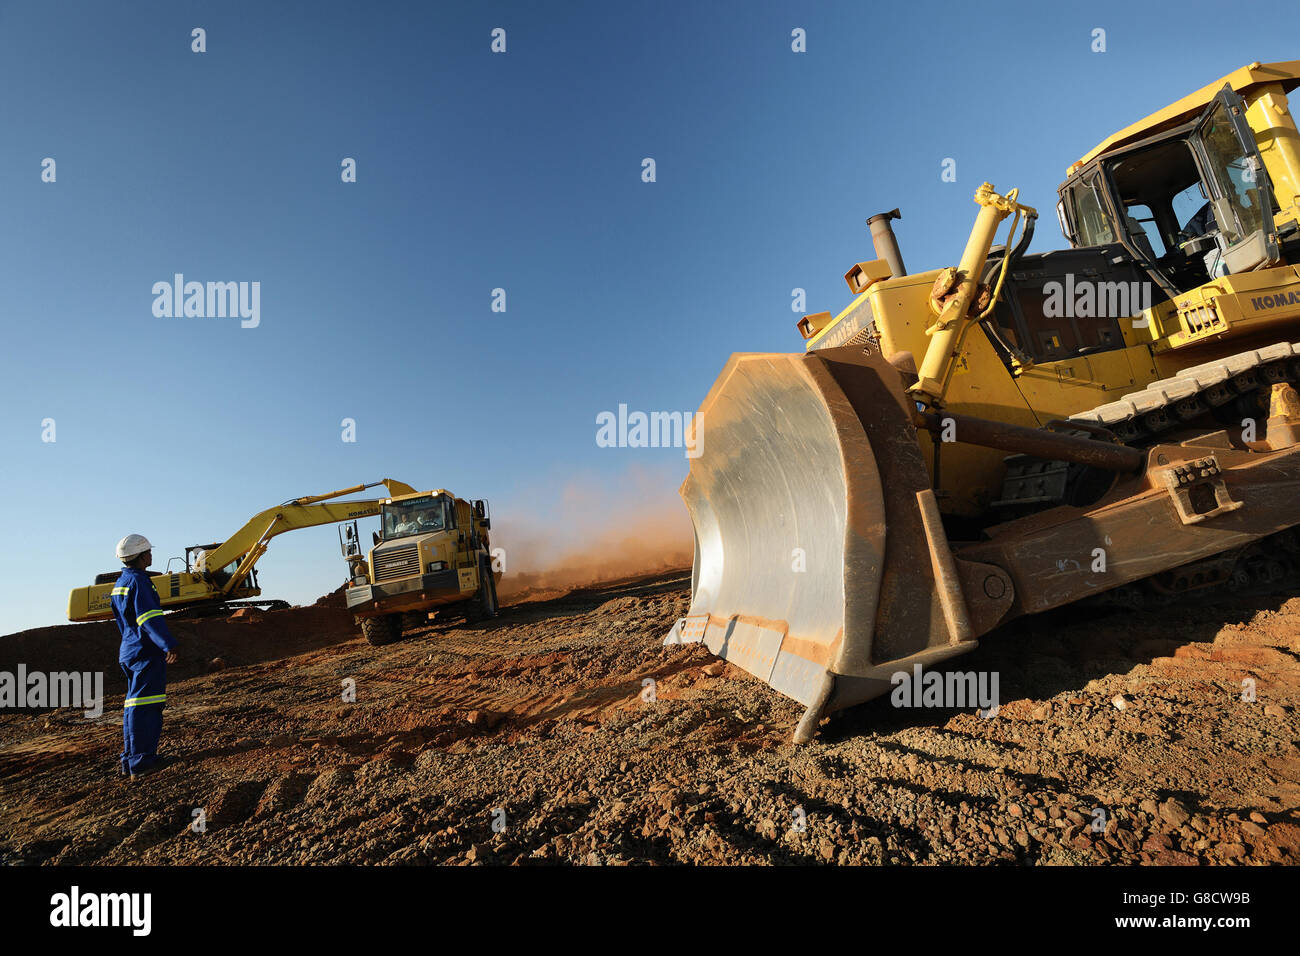 Diamond mining excavation, Rooikoppie, North West, South Africa. Stock Photo